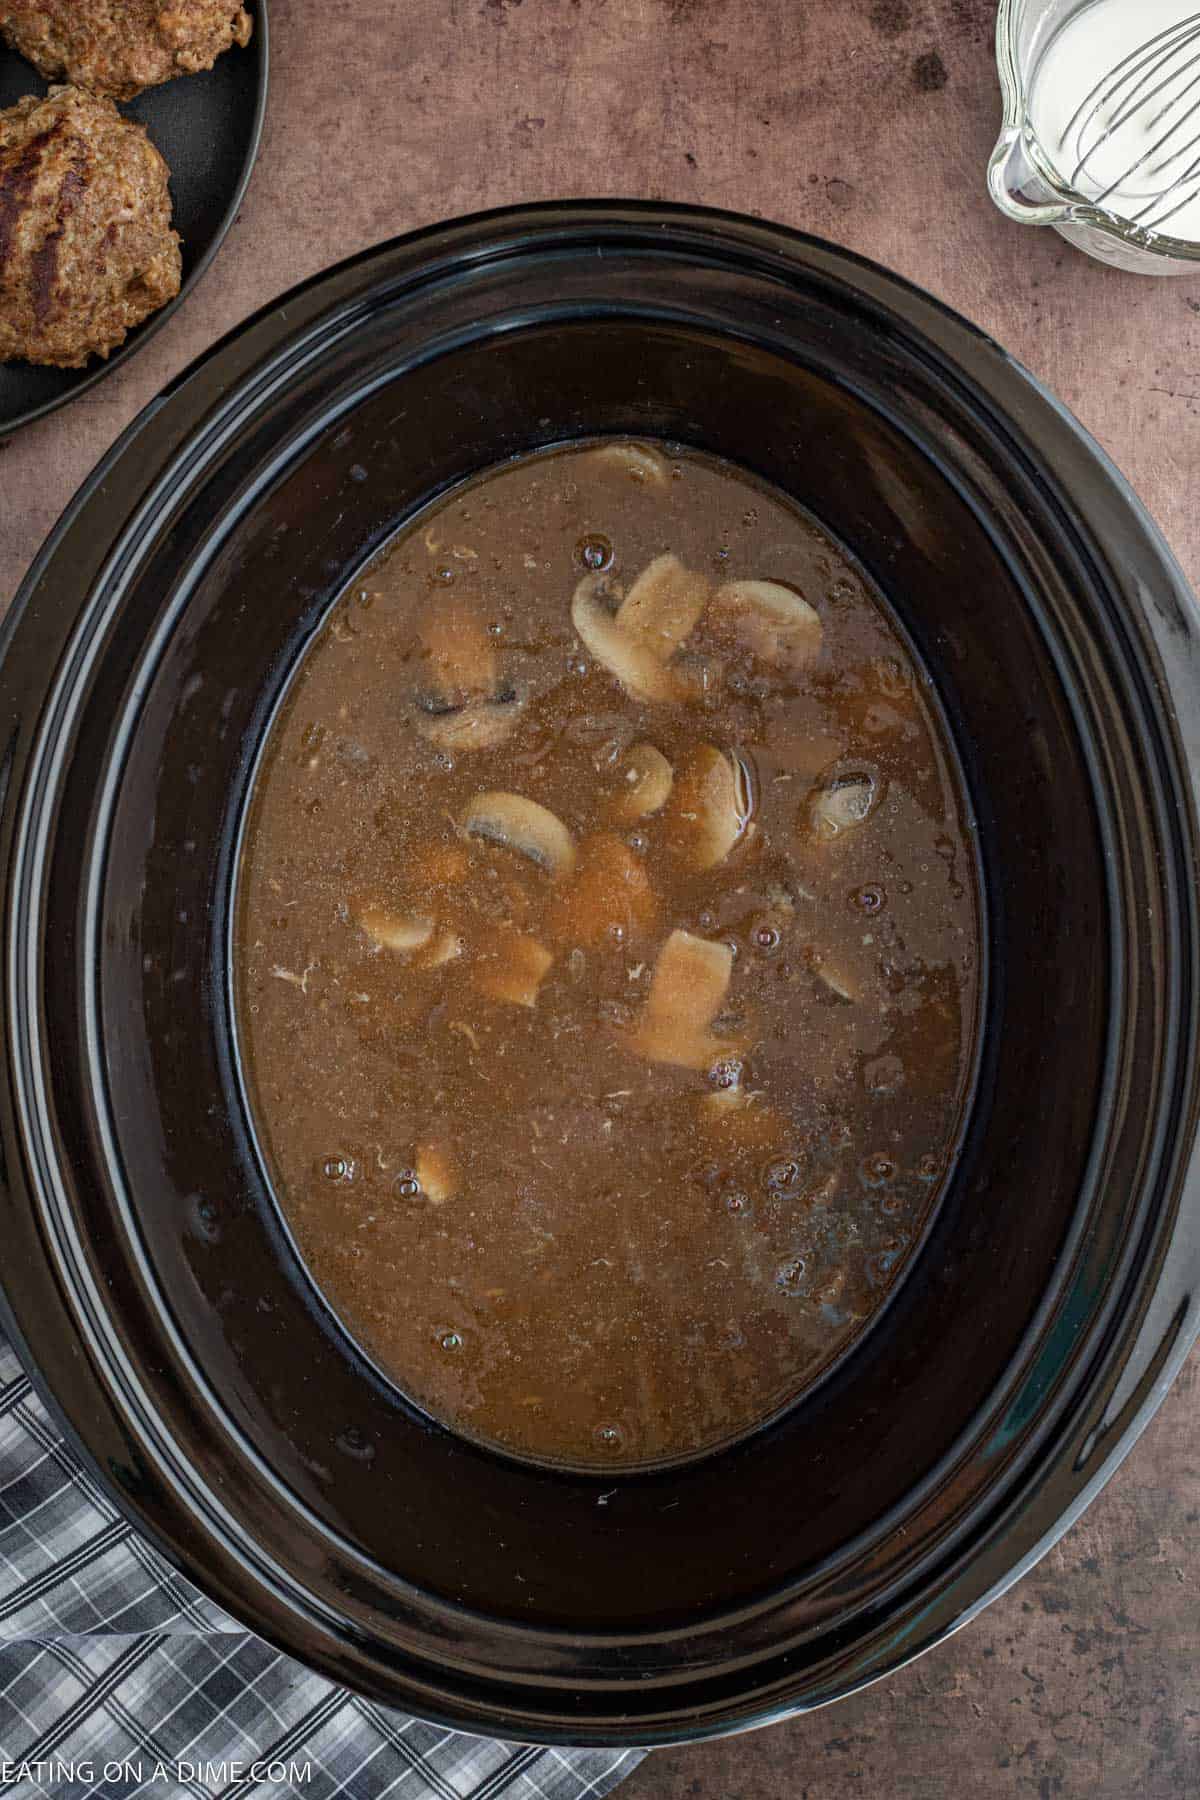 Pouring mixture over beef patties in the slow cooker